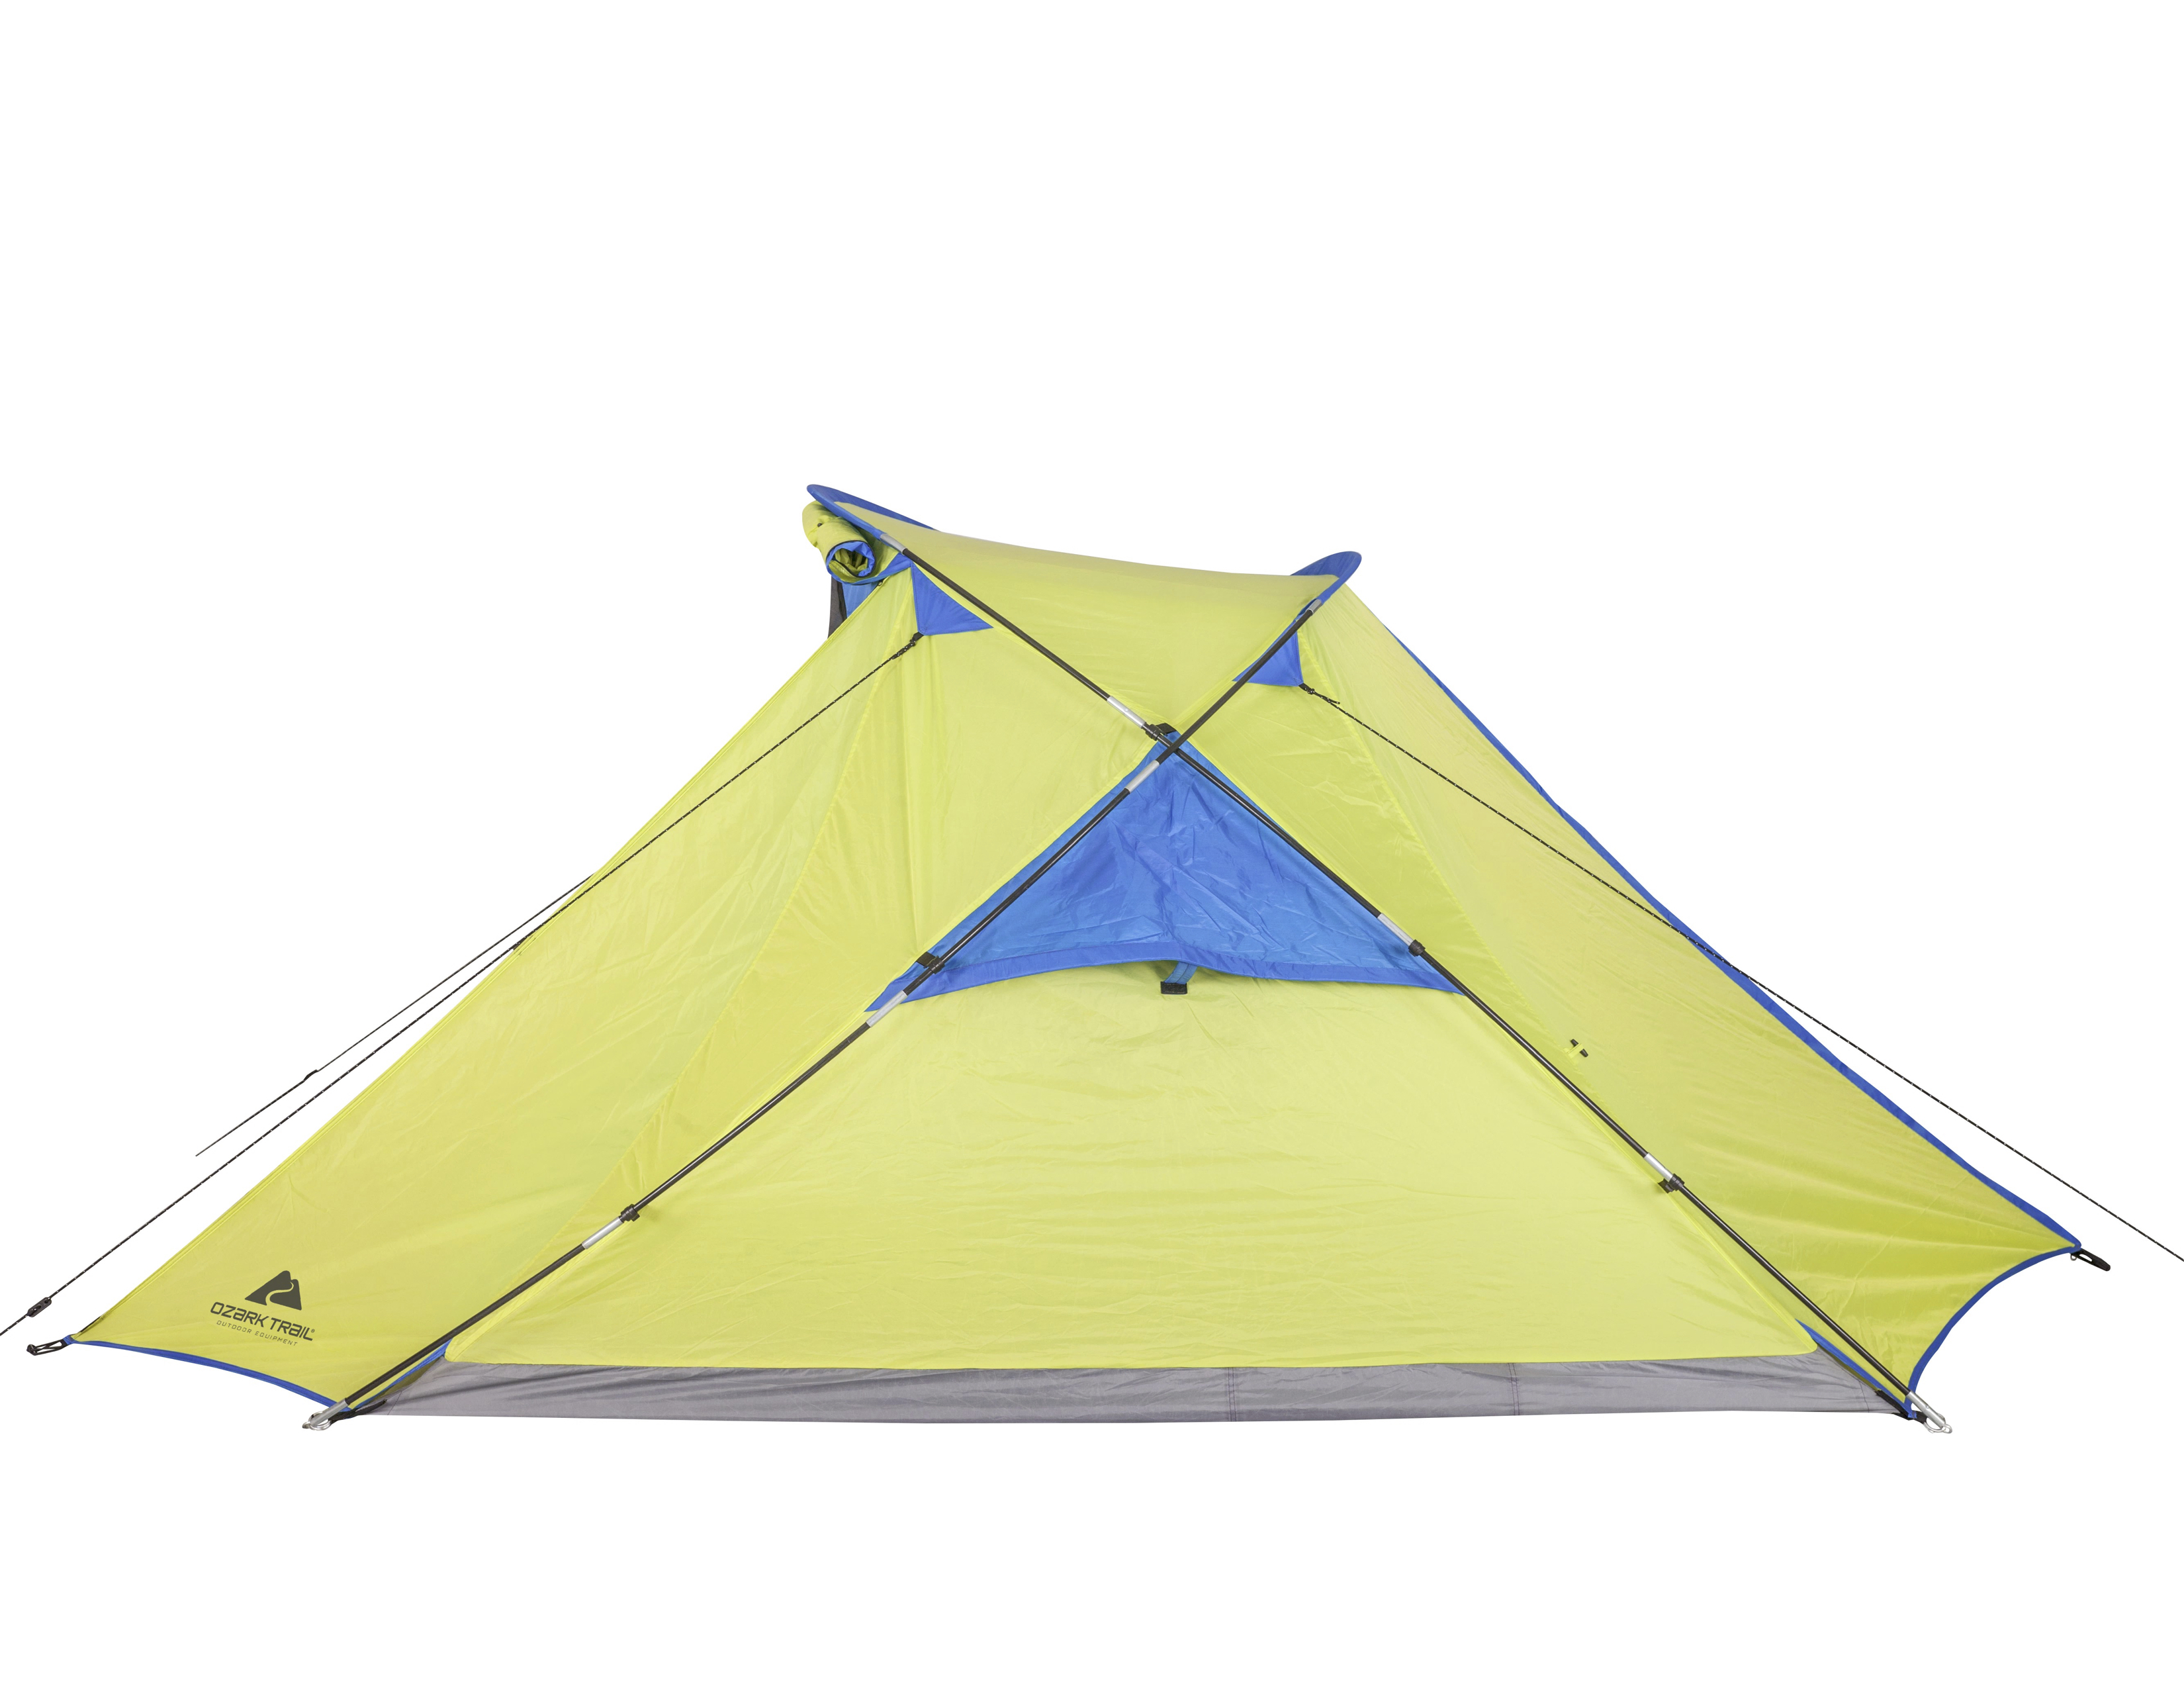 Ozark Trail 3-Person Backpacking Tent - image 4 of 12